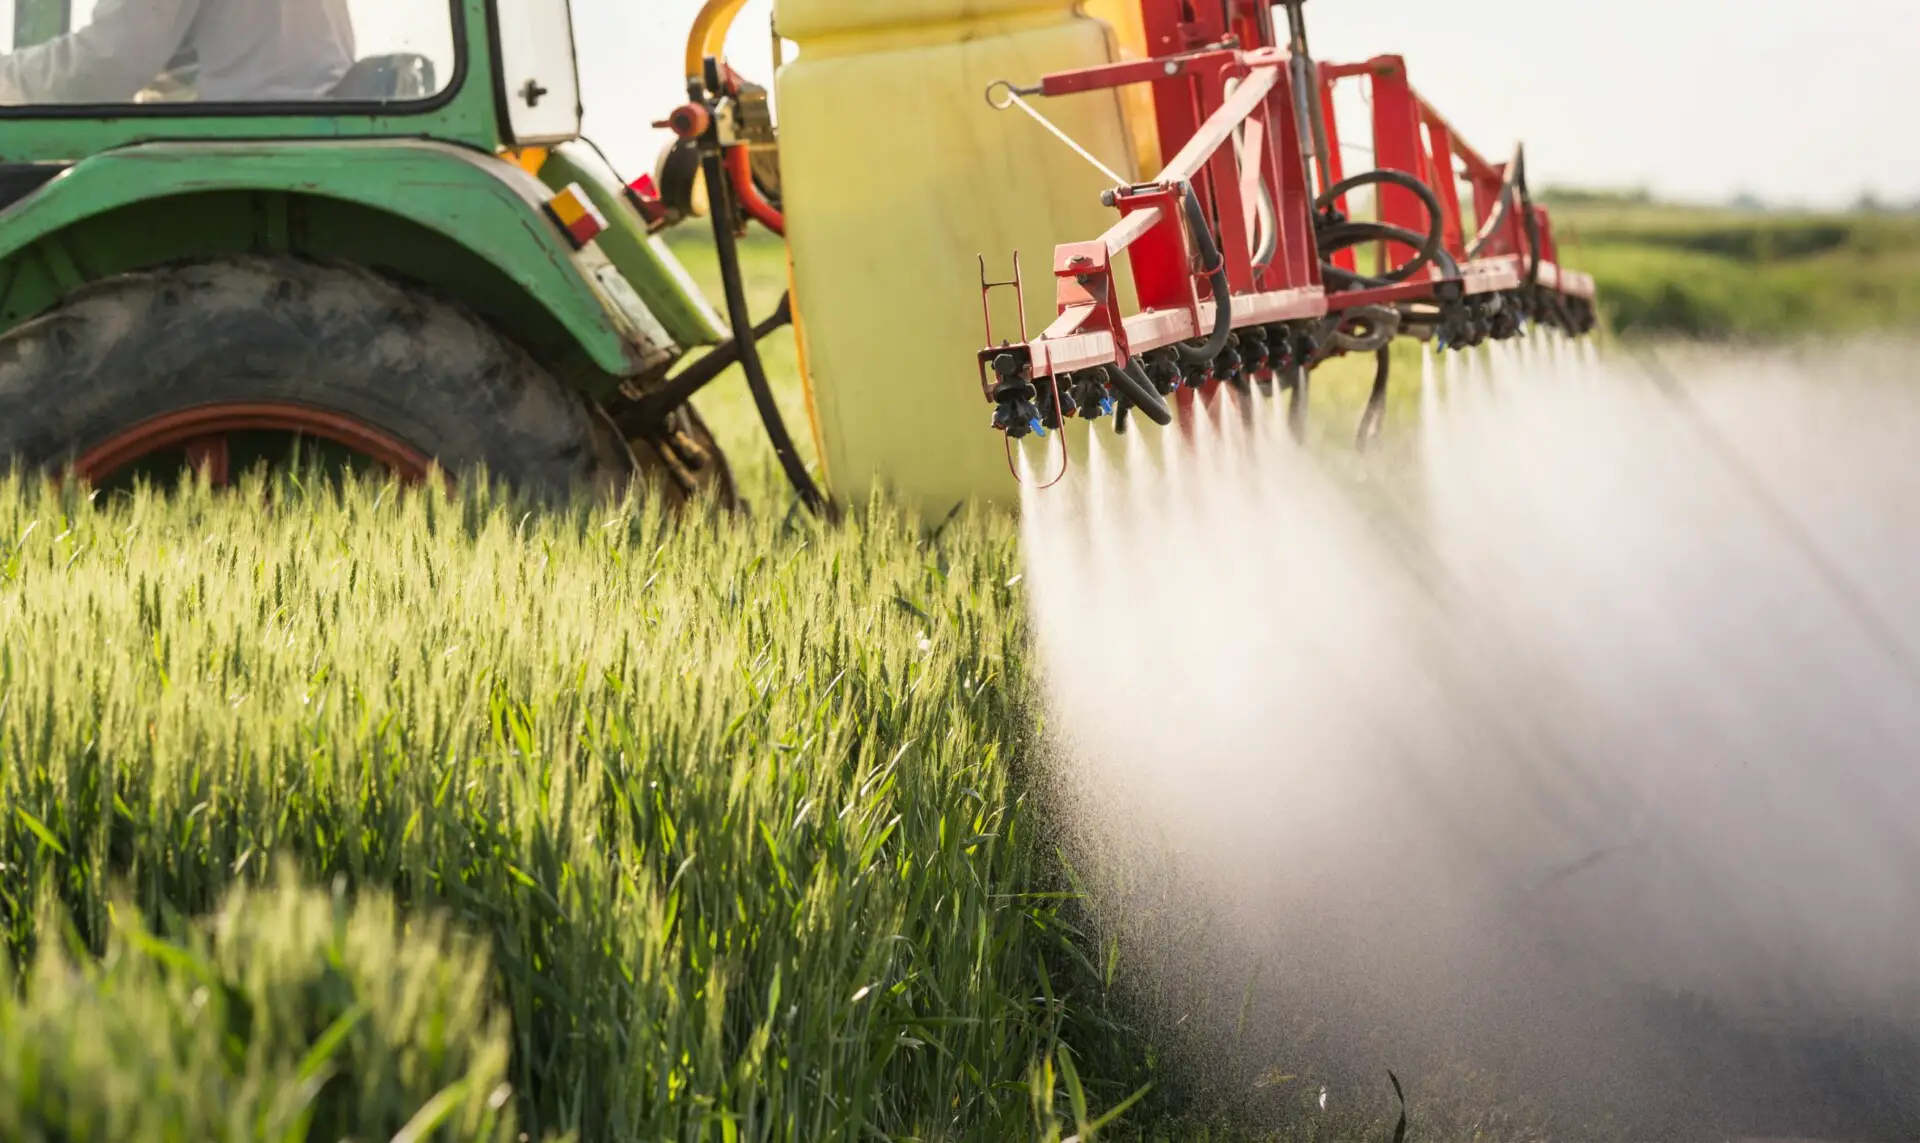 Are Pesticides Bad for the Environment? 4 Quick Facts